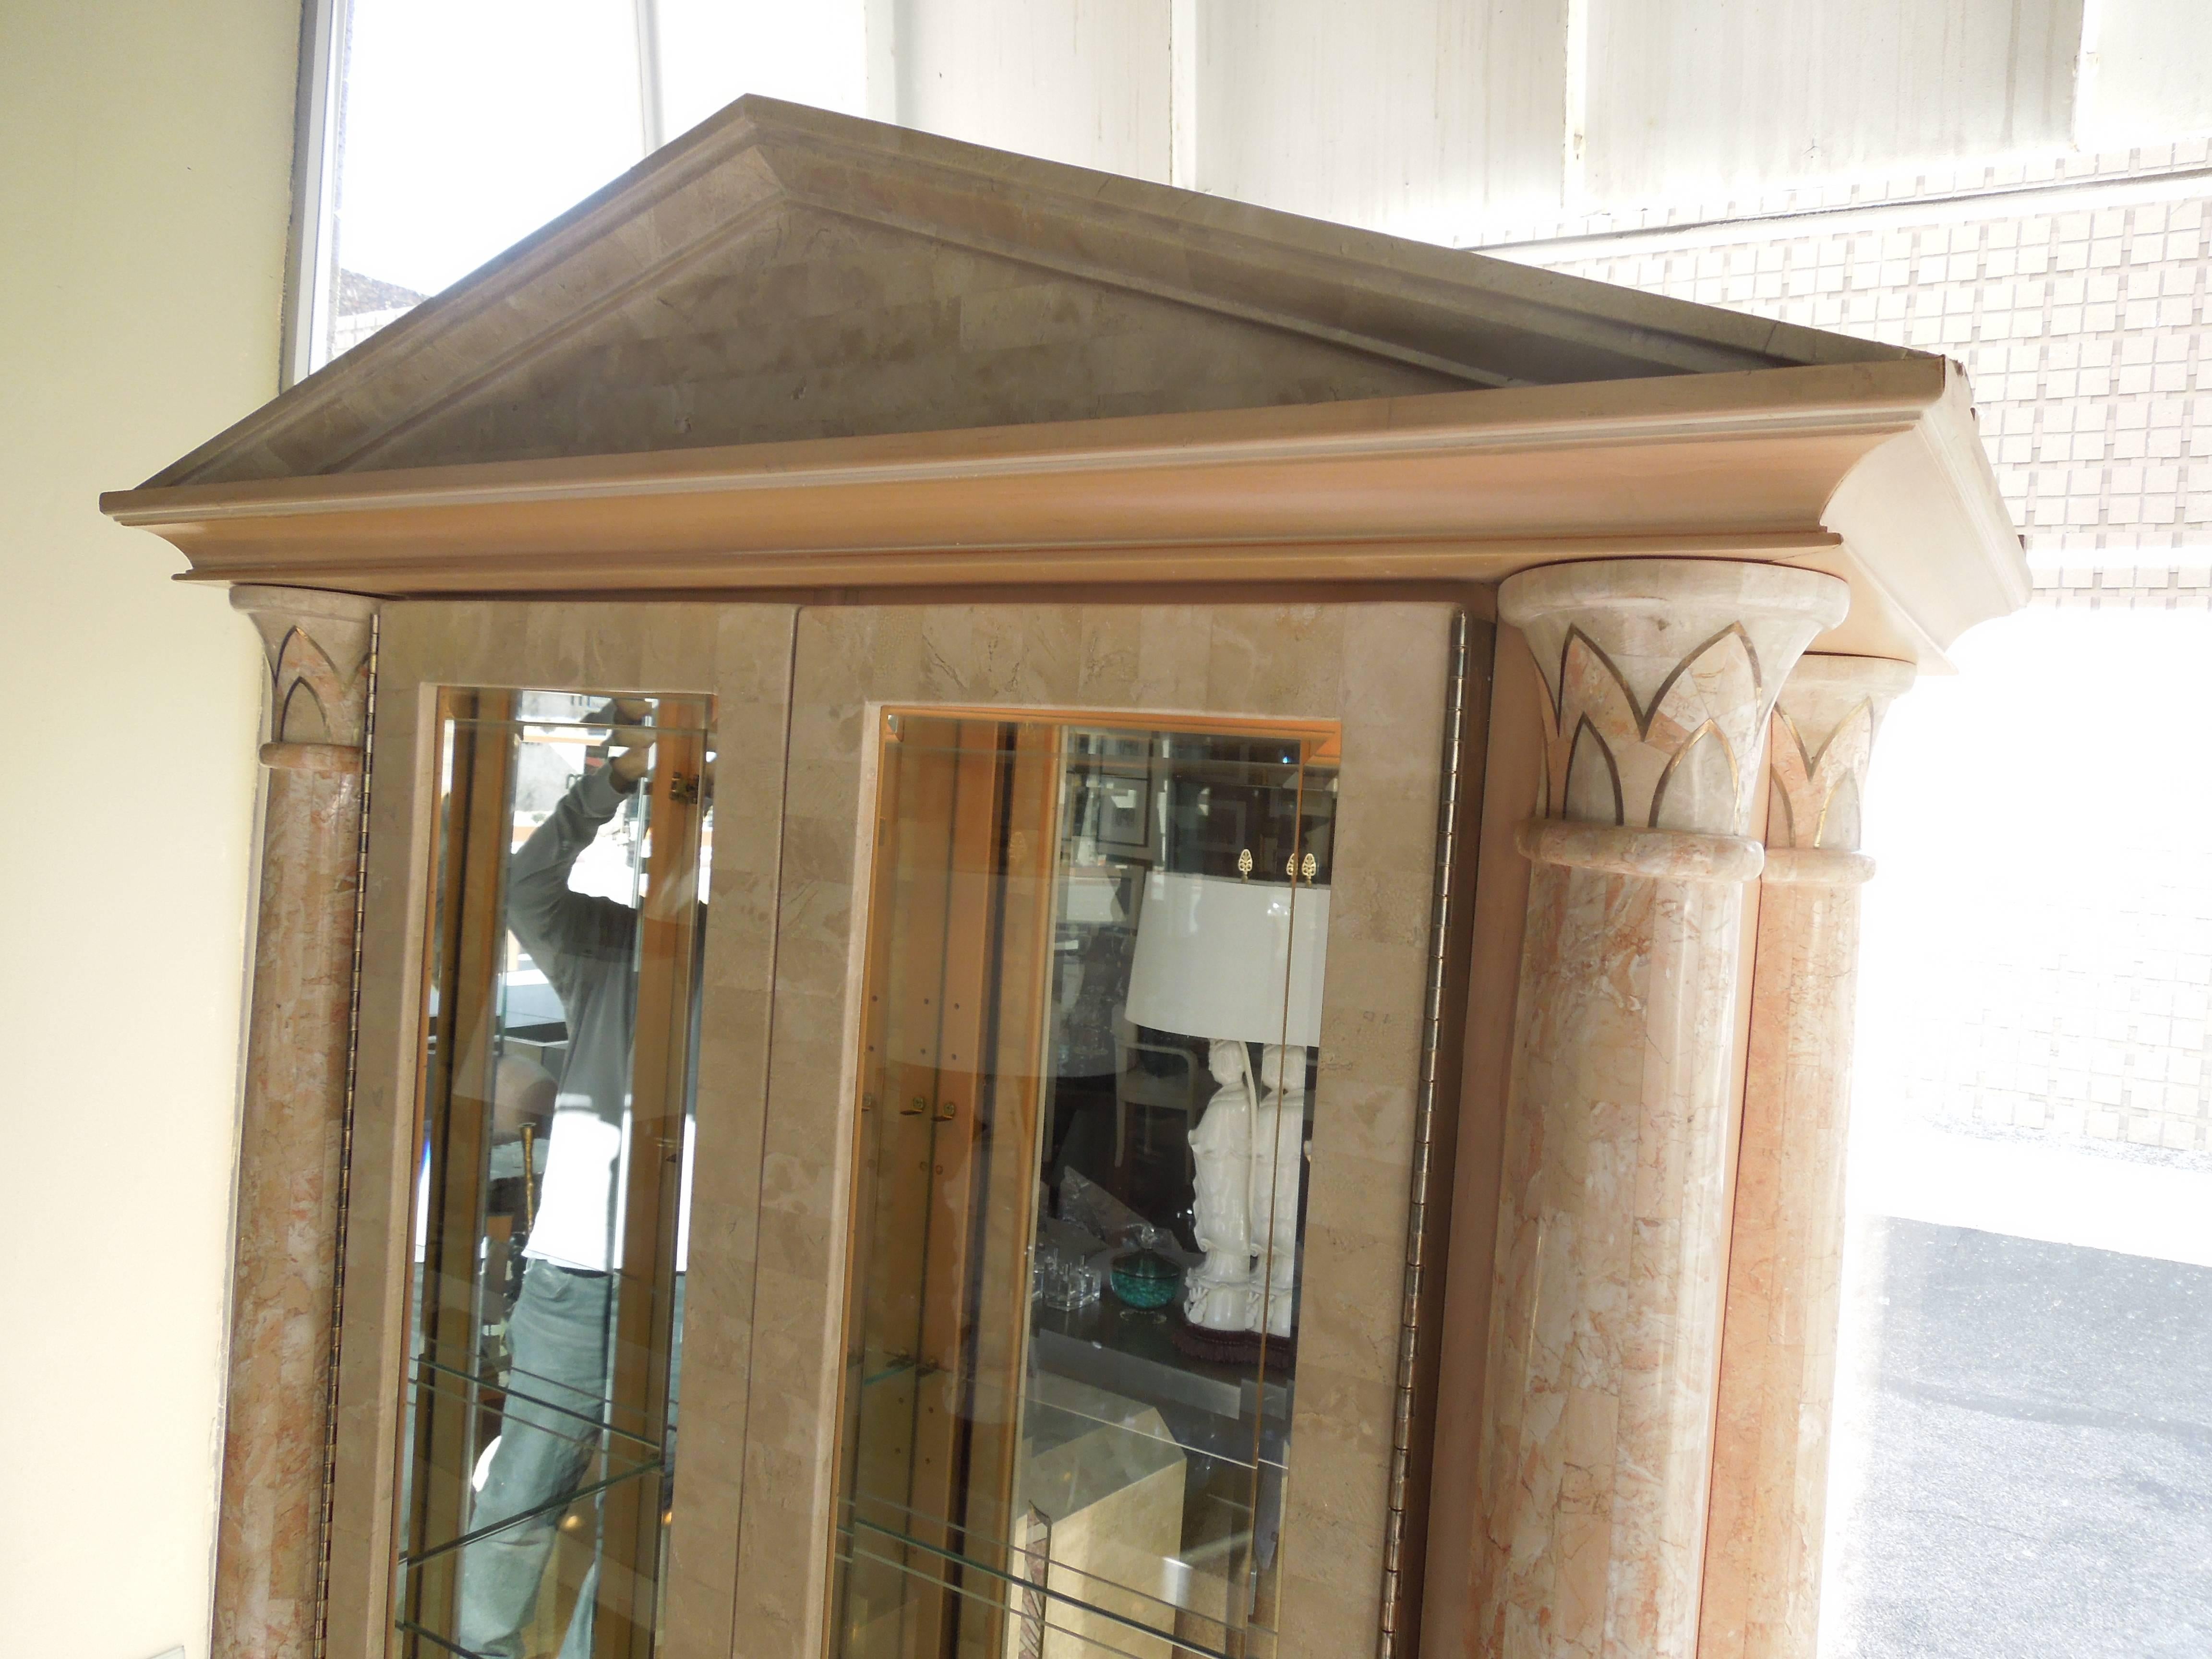 This cabinet was custom made for a client's major Palm Springs estate. The attention to detail and quality on this cabinet is unbelievable. Inlaid coral color tessellated stone with brass trim. Wood sides and base. The columns are Meoclassical with